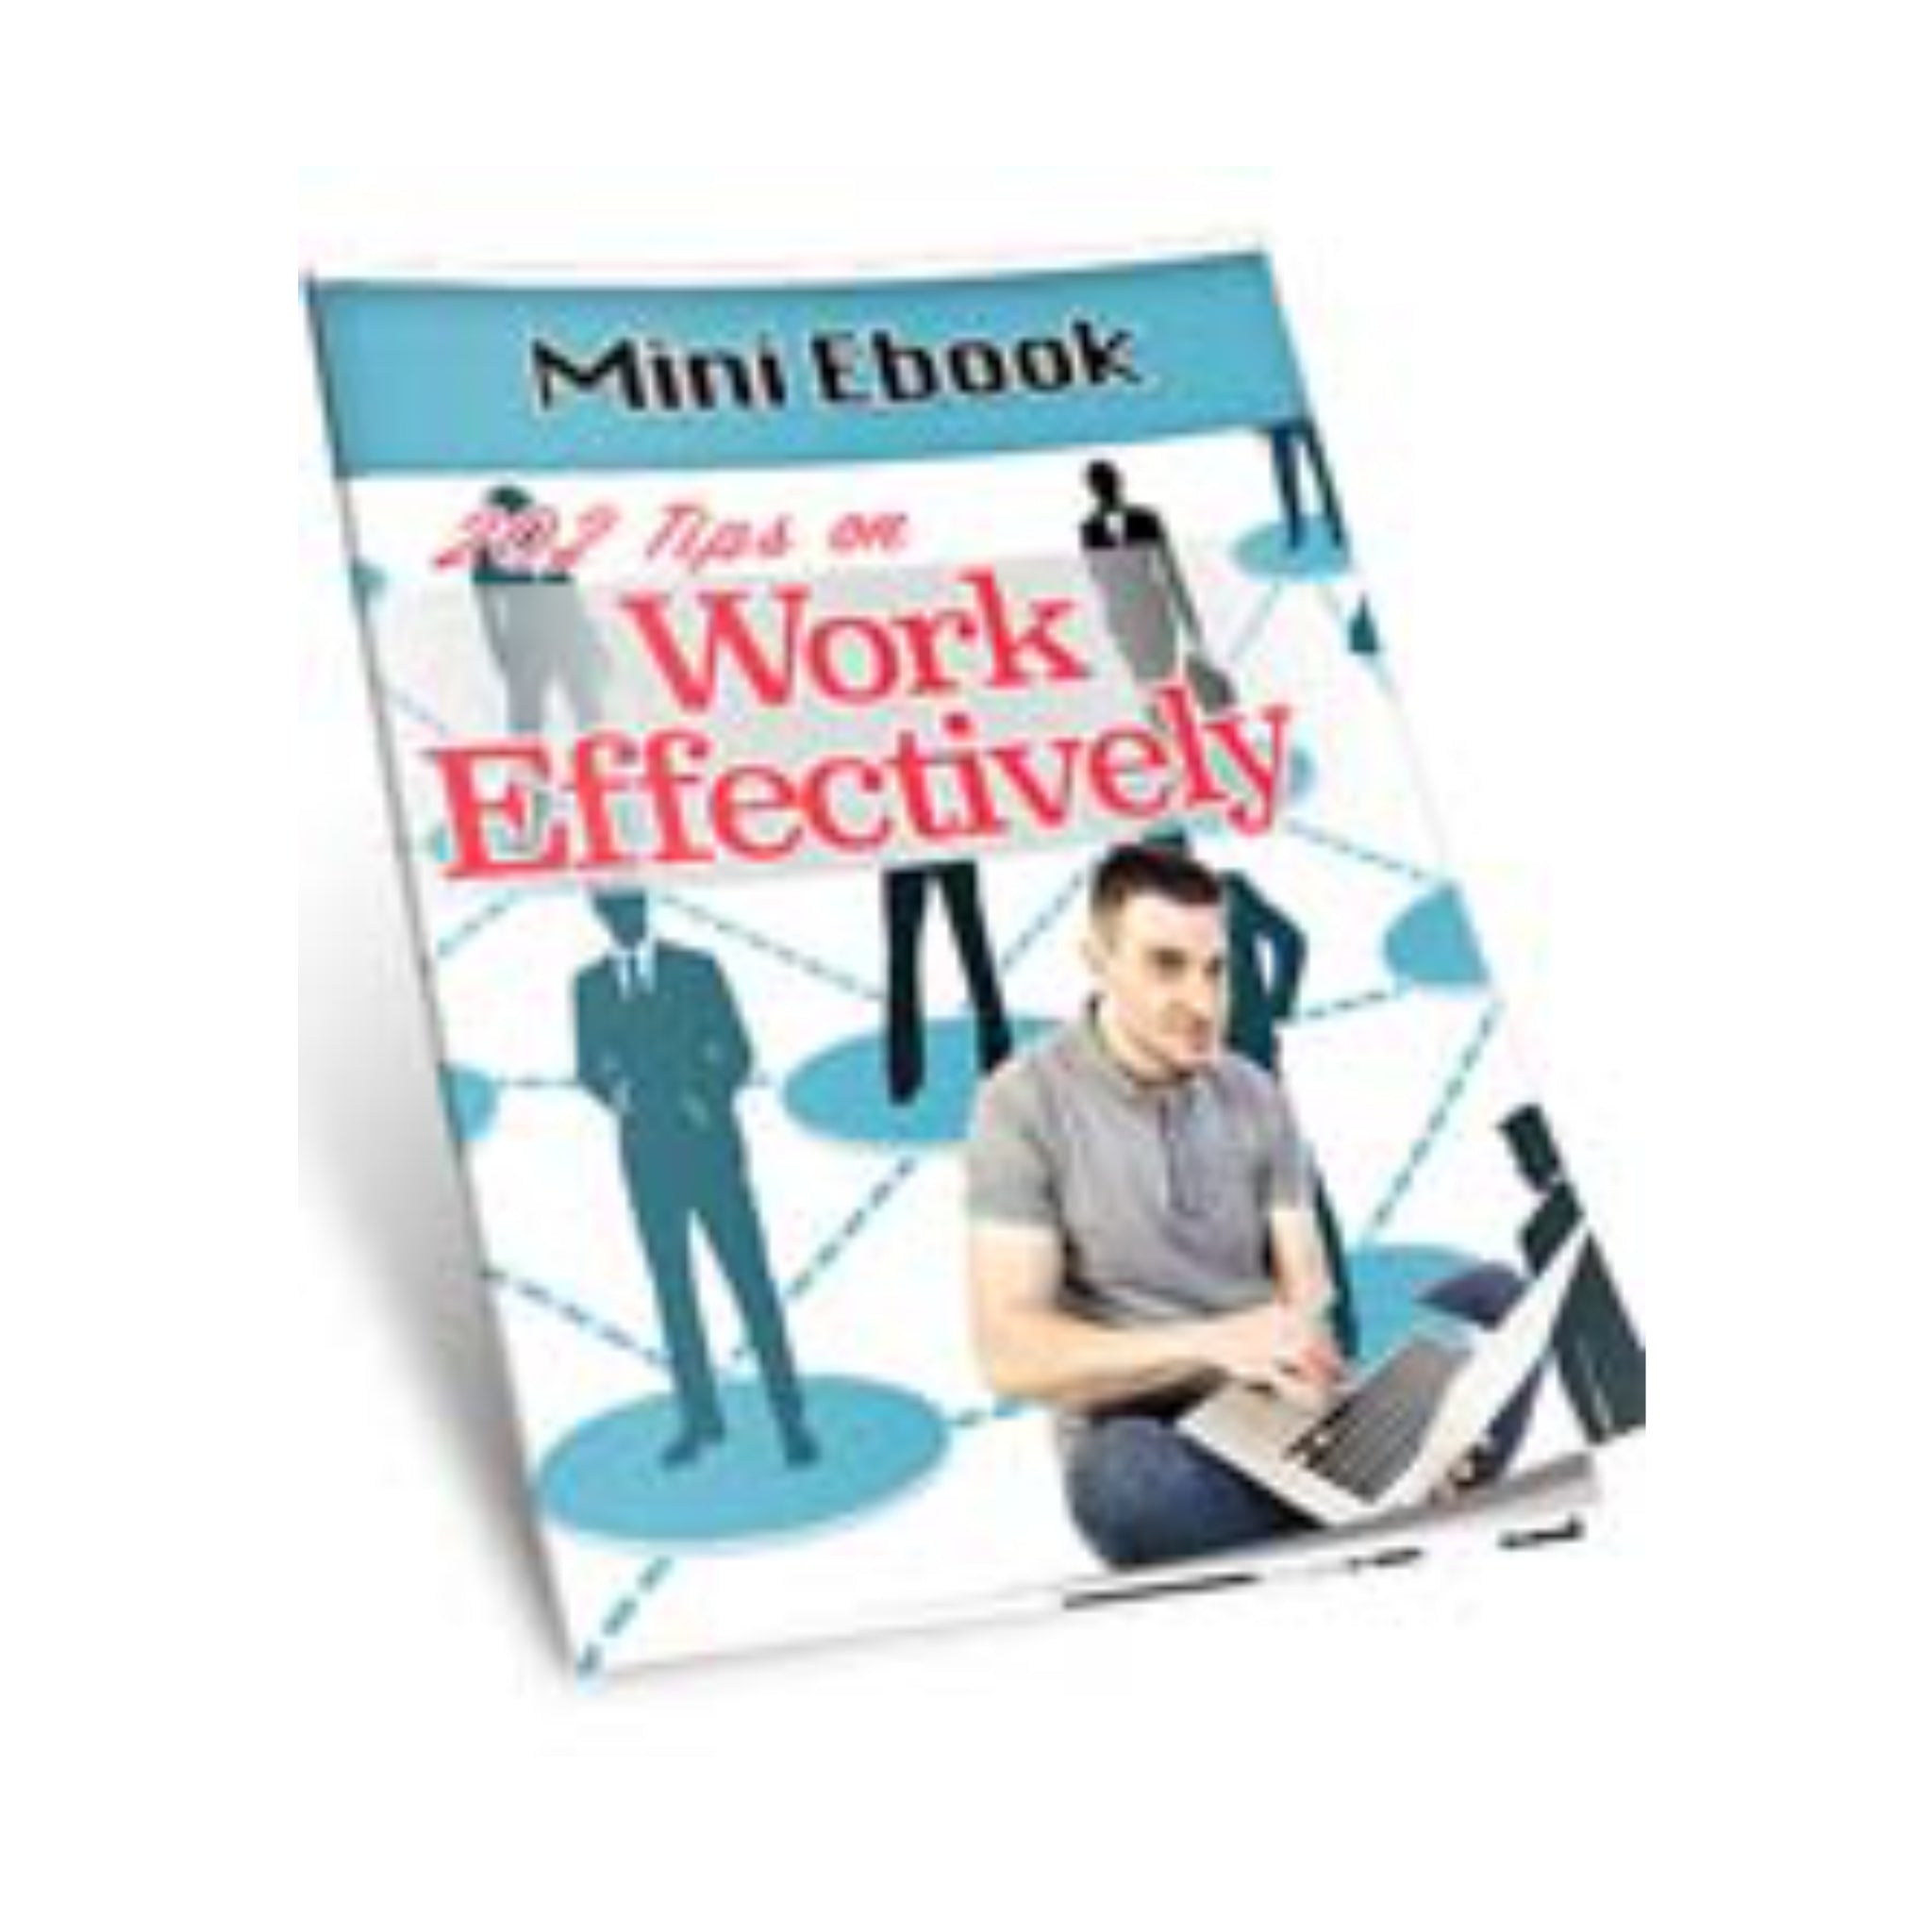 202 Tips On Work Effectively Ebook